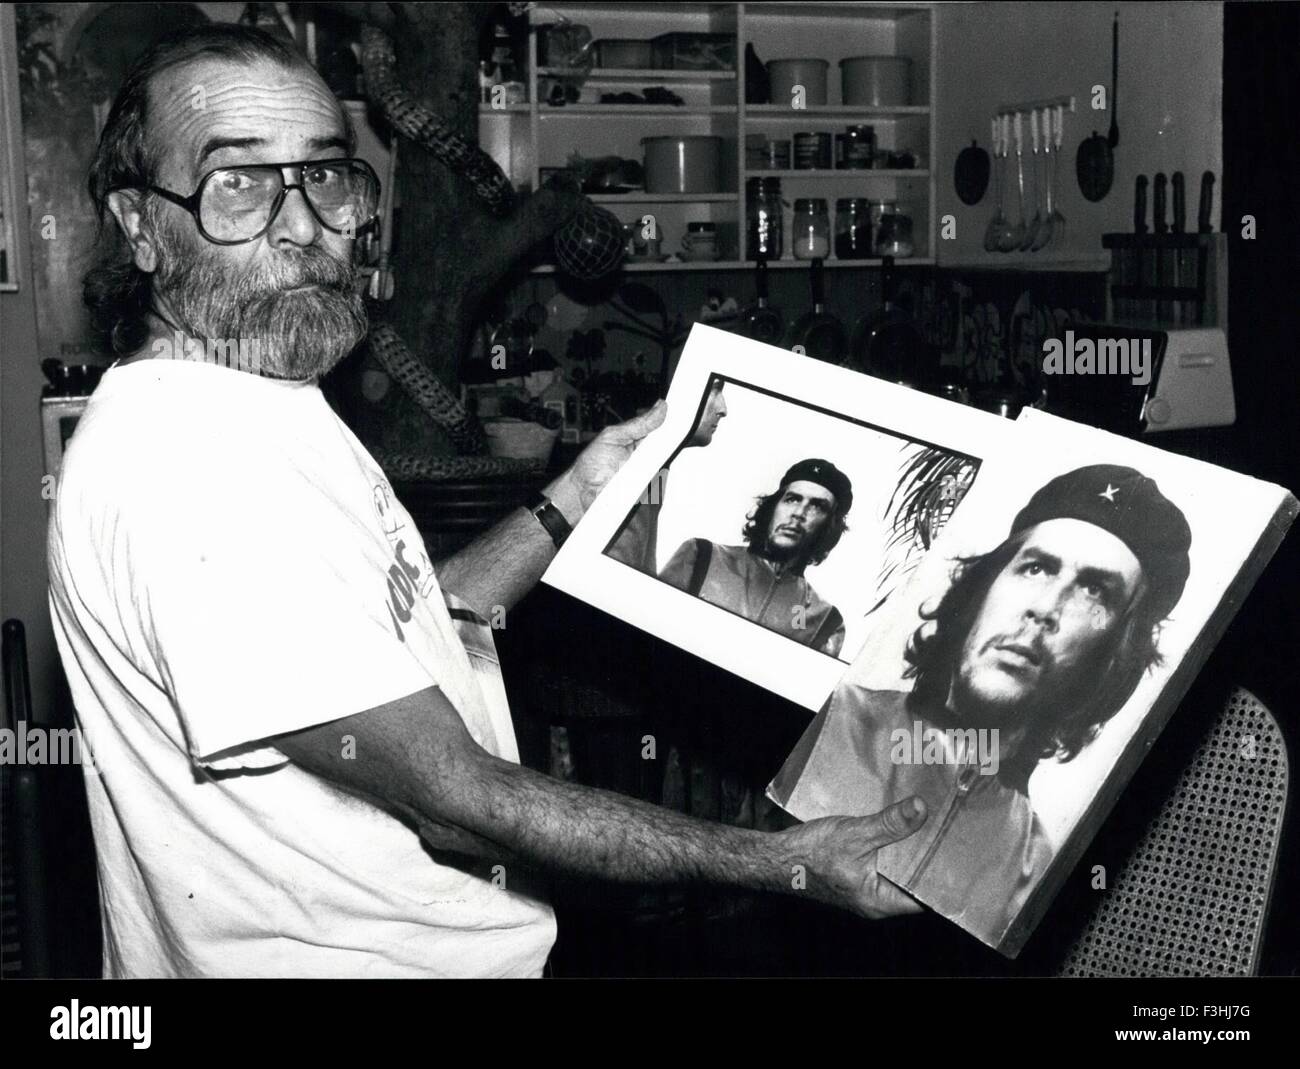 March 6, 1960 - Che: The portrait and its photographer  On the 6th of March 1960, Alberto Korda, a young Cuban photographer, shot a picture that in the meantime has become world-famous, the portrait of Che Guevara. He got the revolutionary on his film while taking pictures during obsequies for the victims of an accident in Havana. Albert Korba shows the original and the portrait of the picture that made its way around the world. 23/01/89 (Credit Image: © Keystone Pictures USA/ZUMAPRESS.com) Stock Photo